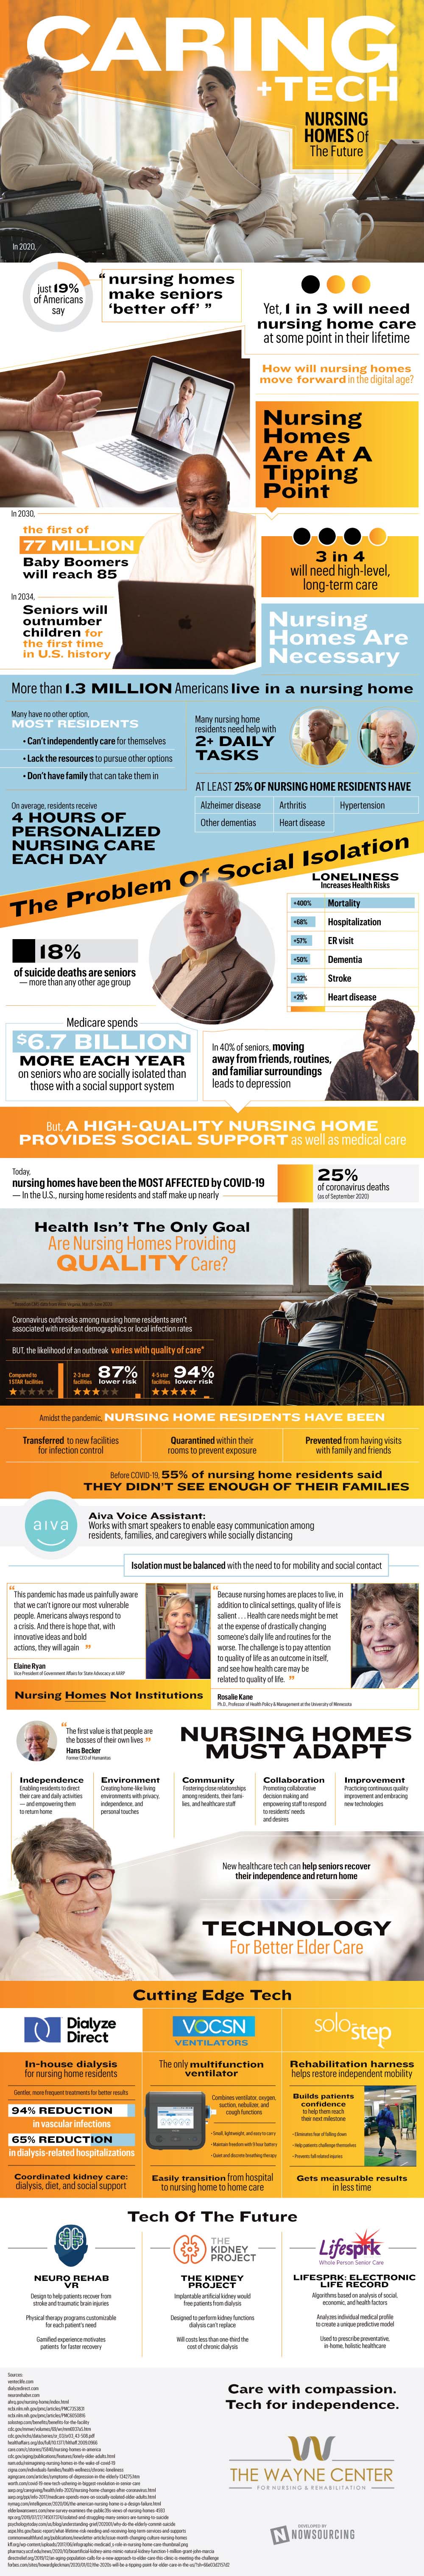 Caring and Tech: Nursing Homes of the Future